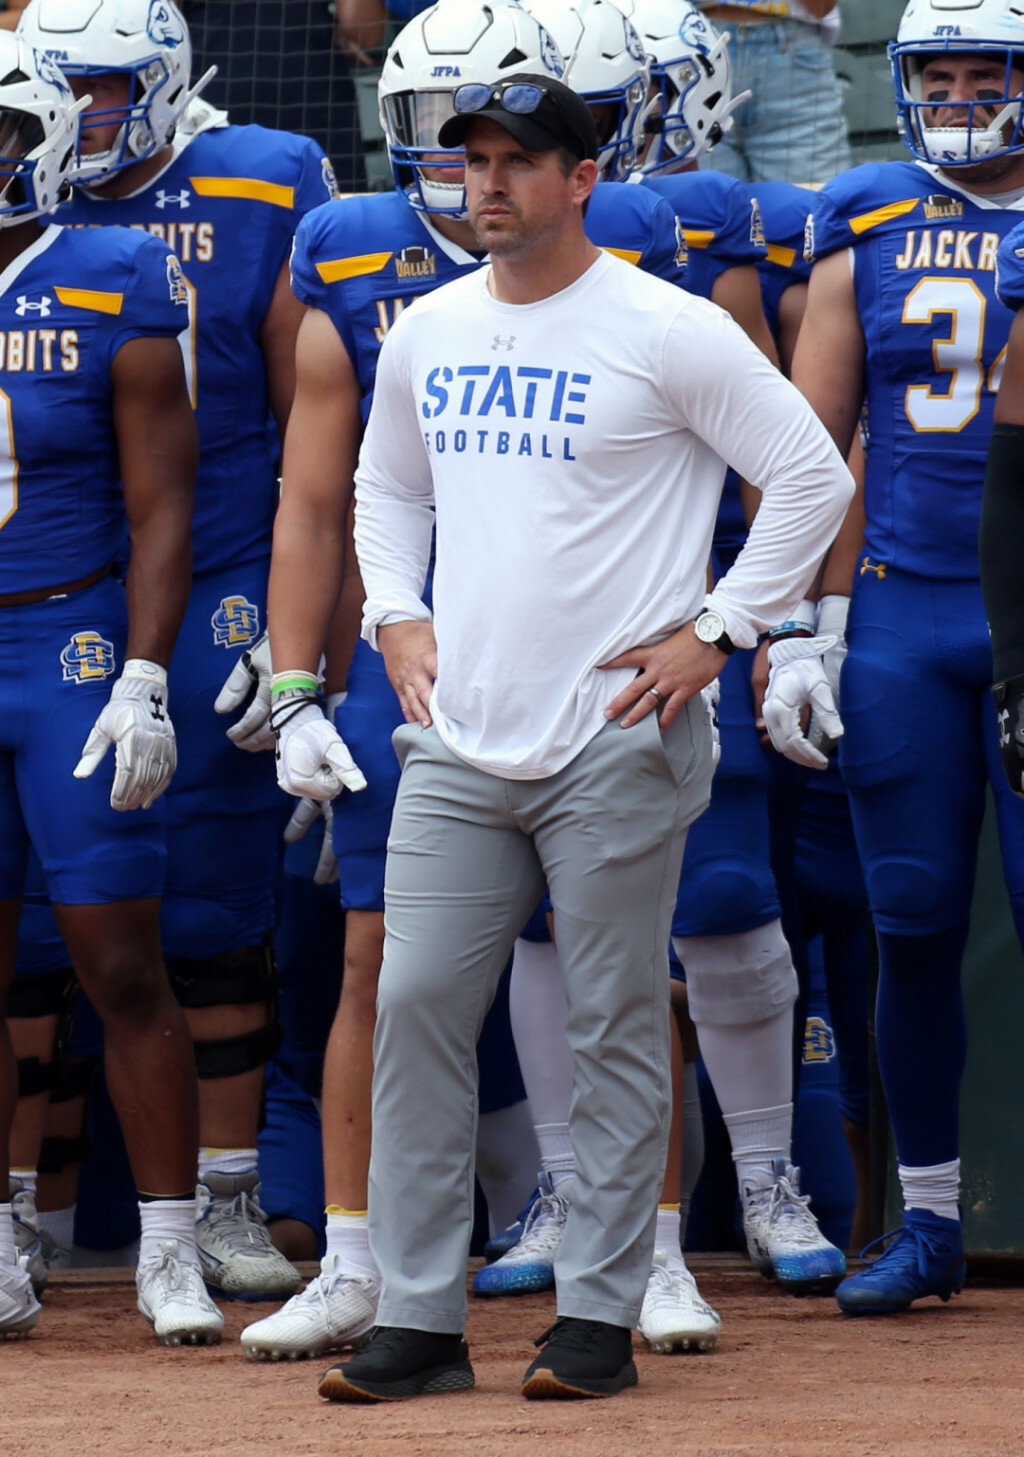 South Dakota State head coach prepares to run out onto the field before a game against Drake at Target Field in Minneapolis on Sept. 16. Rogers was selected as the Eddie Robinson Award winner on Thursday, which is given to the FCS national coach of the year. (Andrew Holtan/Brookings Register)